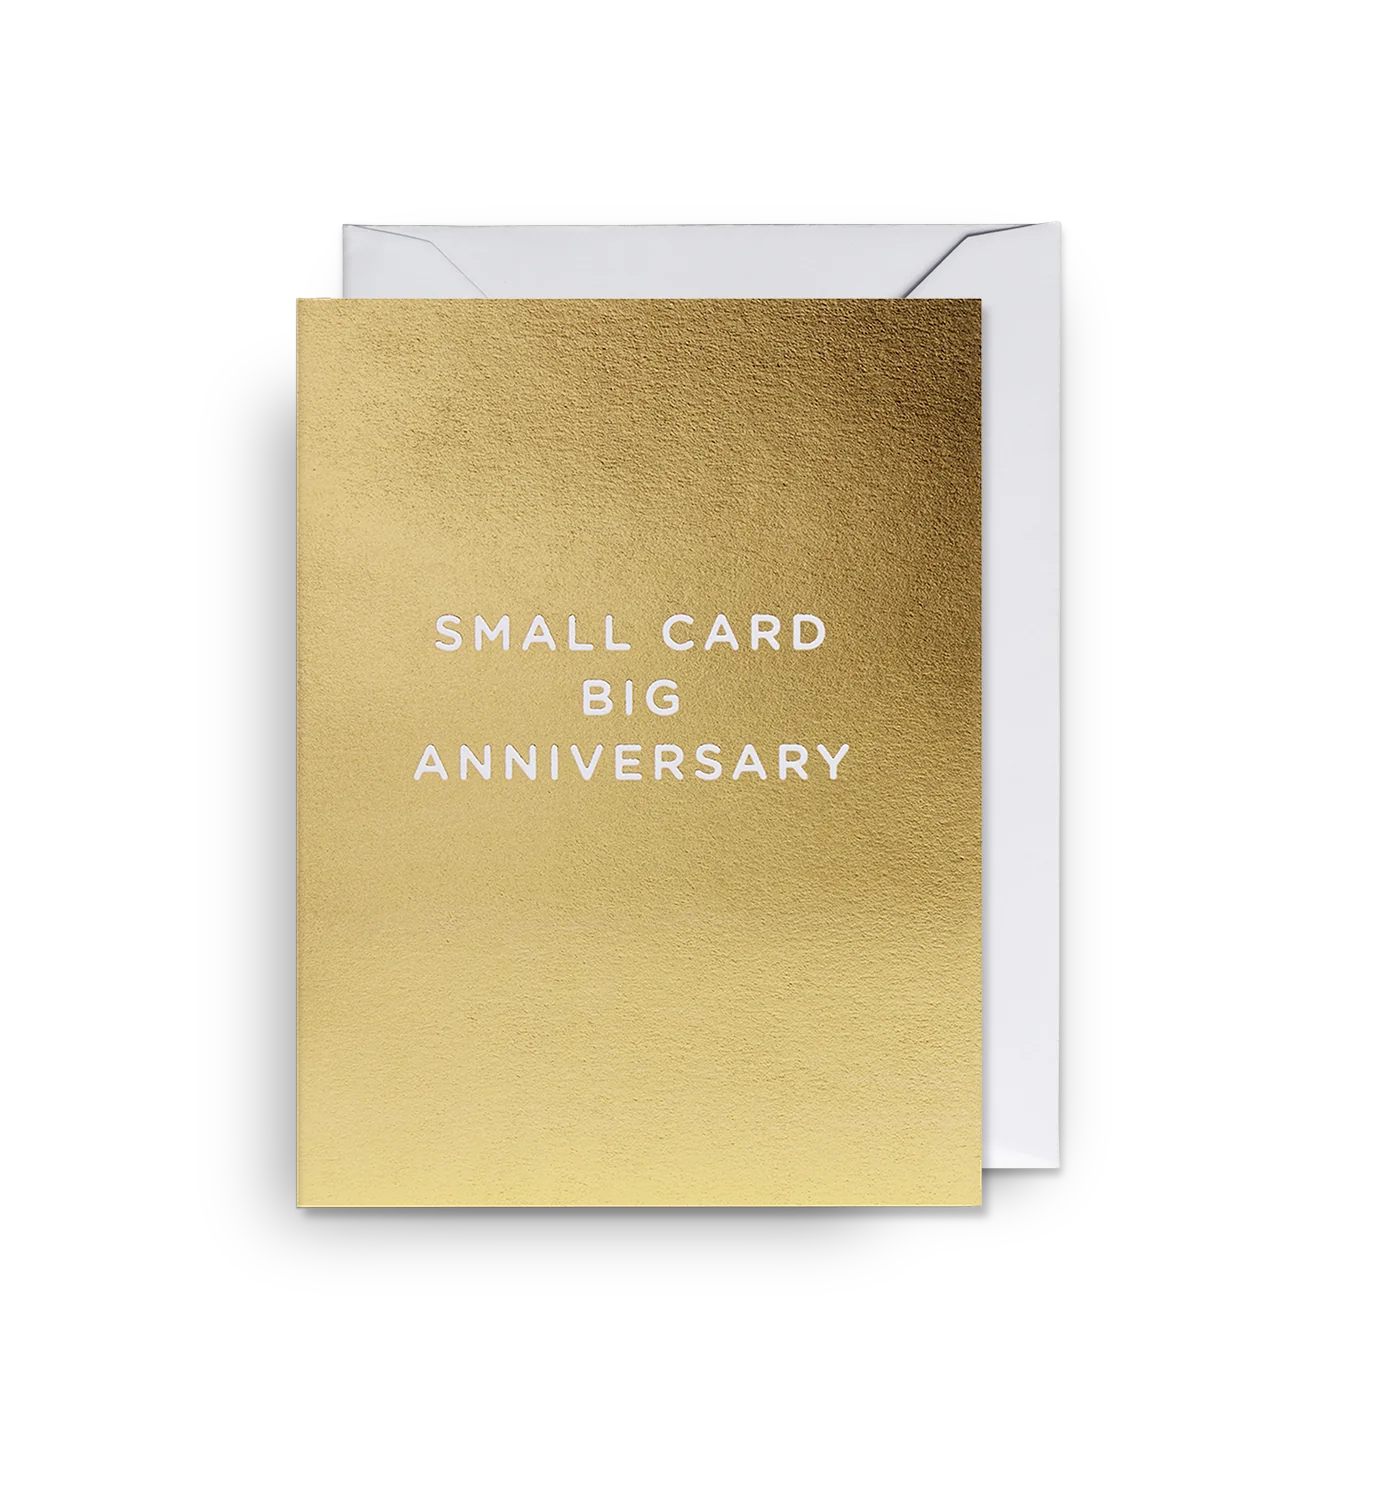 Fabulous Greeting Cards Mini Card Small Card Big Anniversary by Weirs of Baggot Street